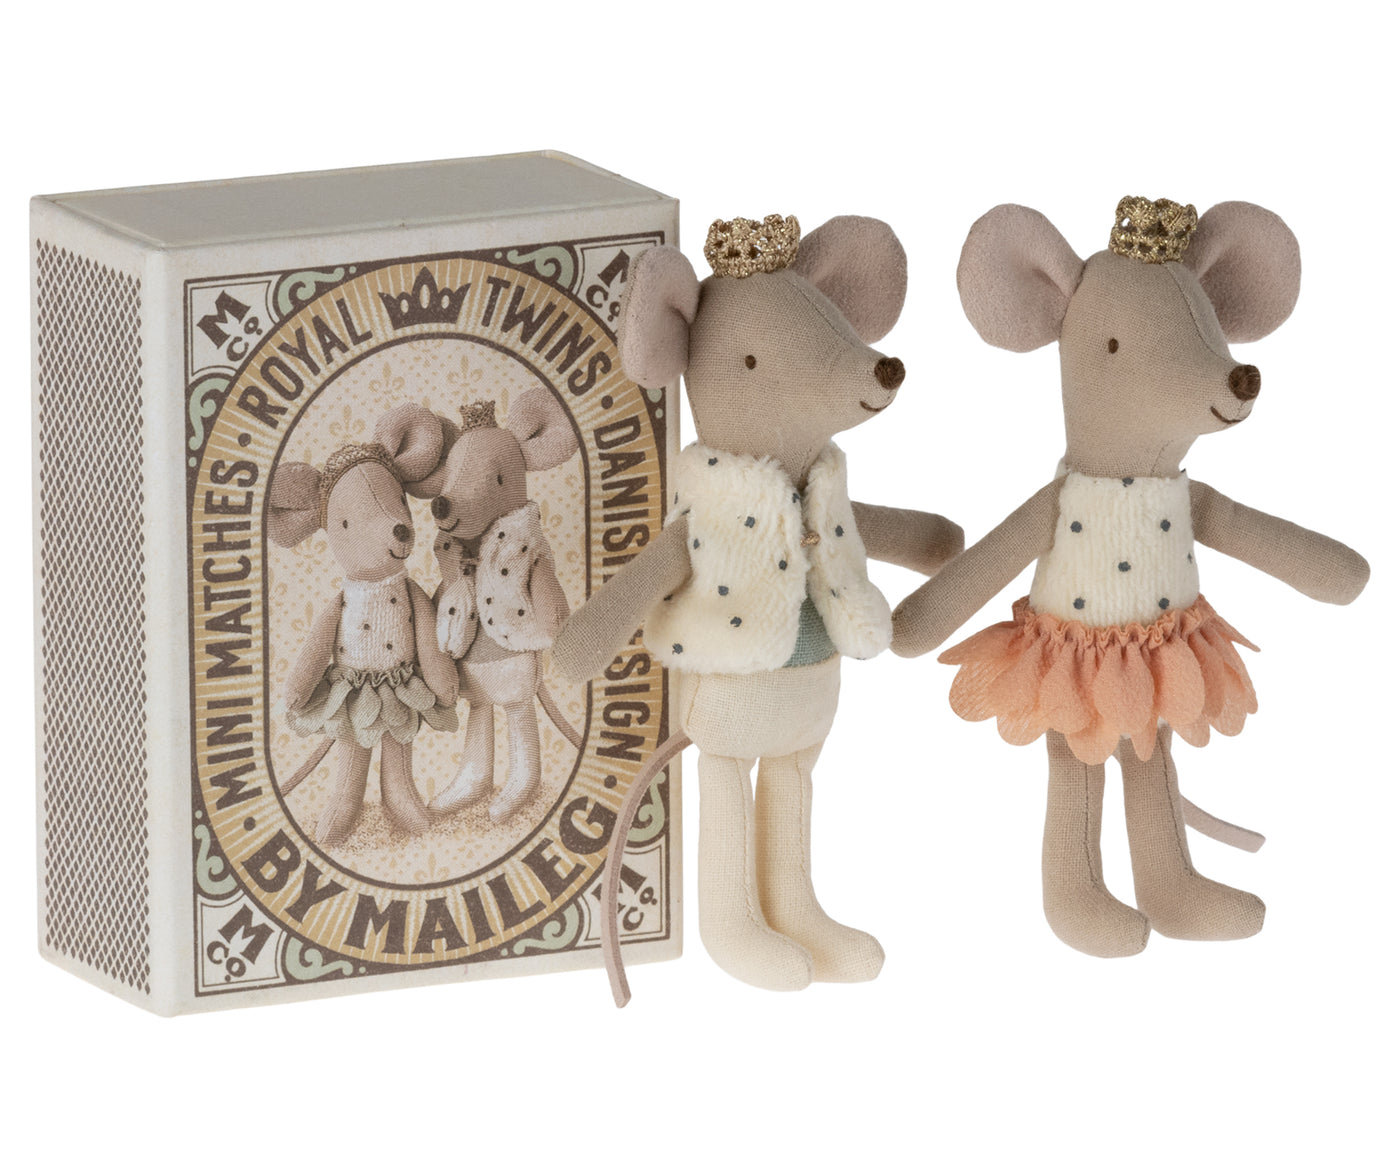 Royal twins mice, Little sister and  brother in box